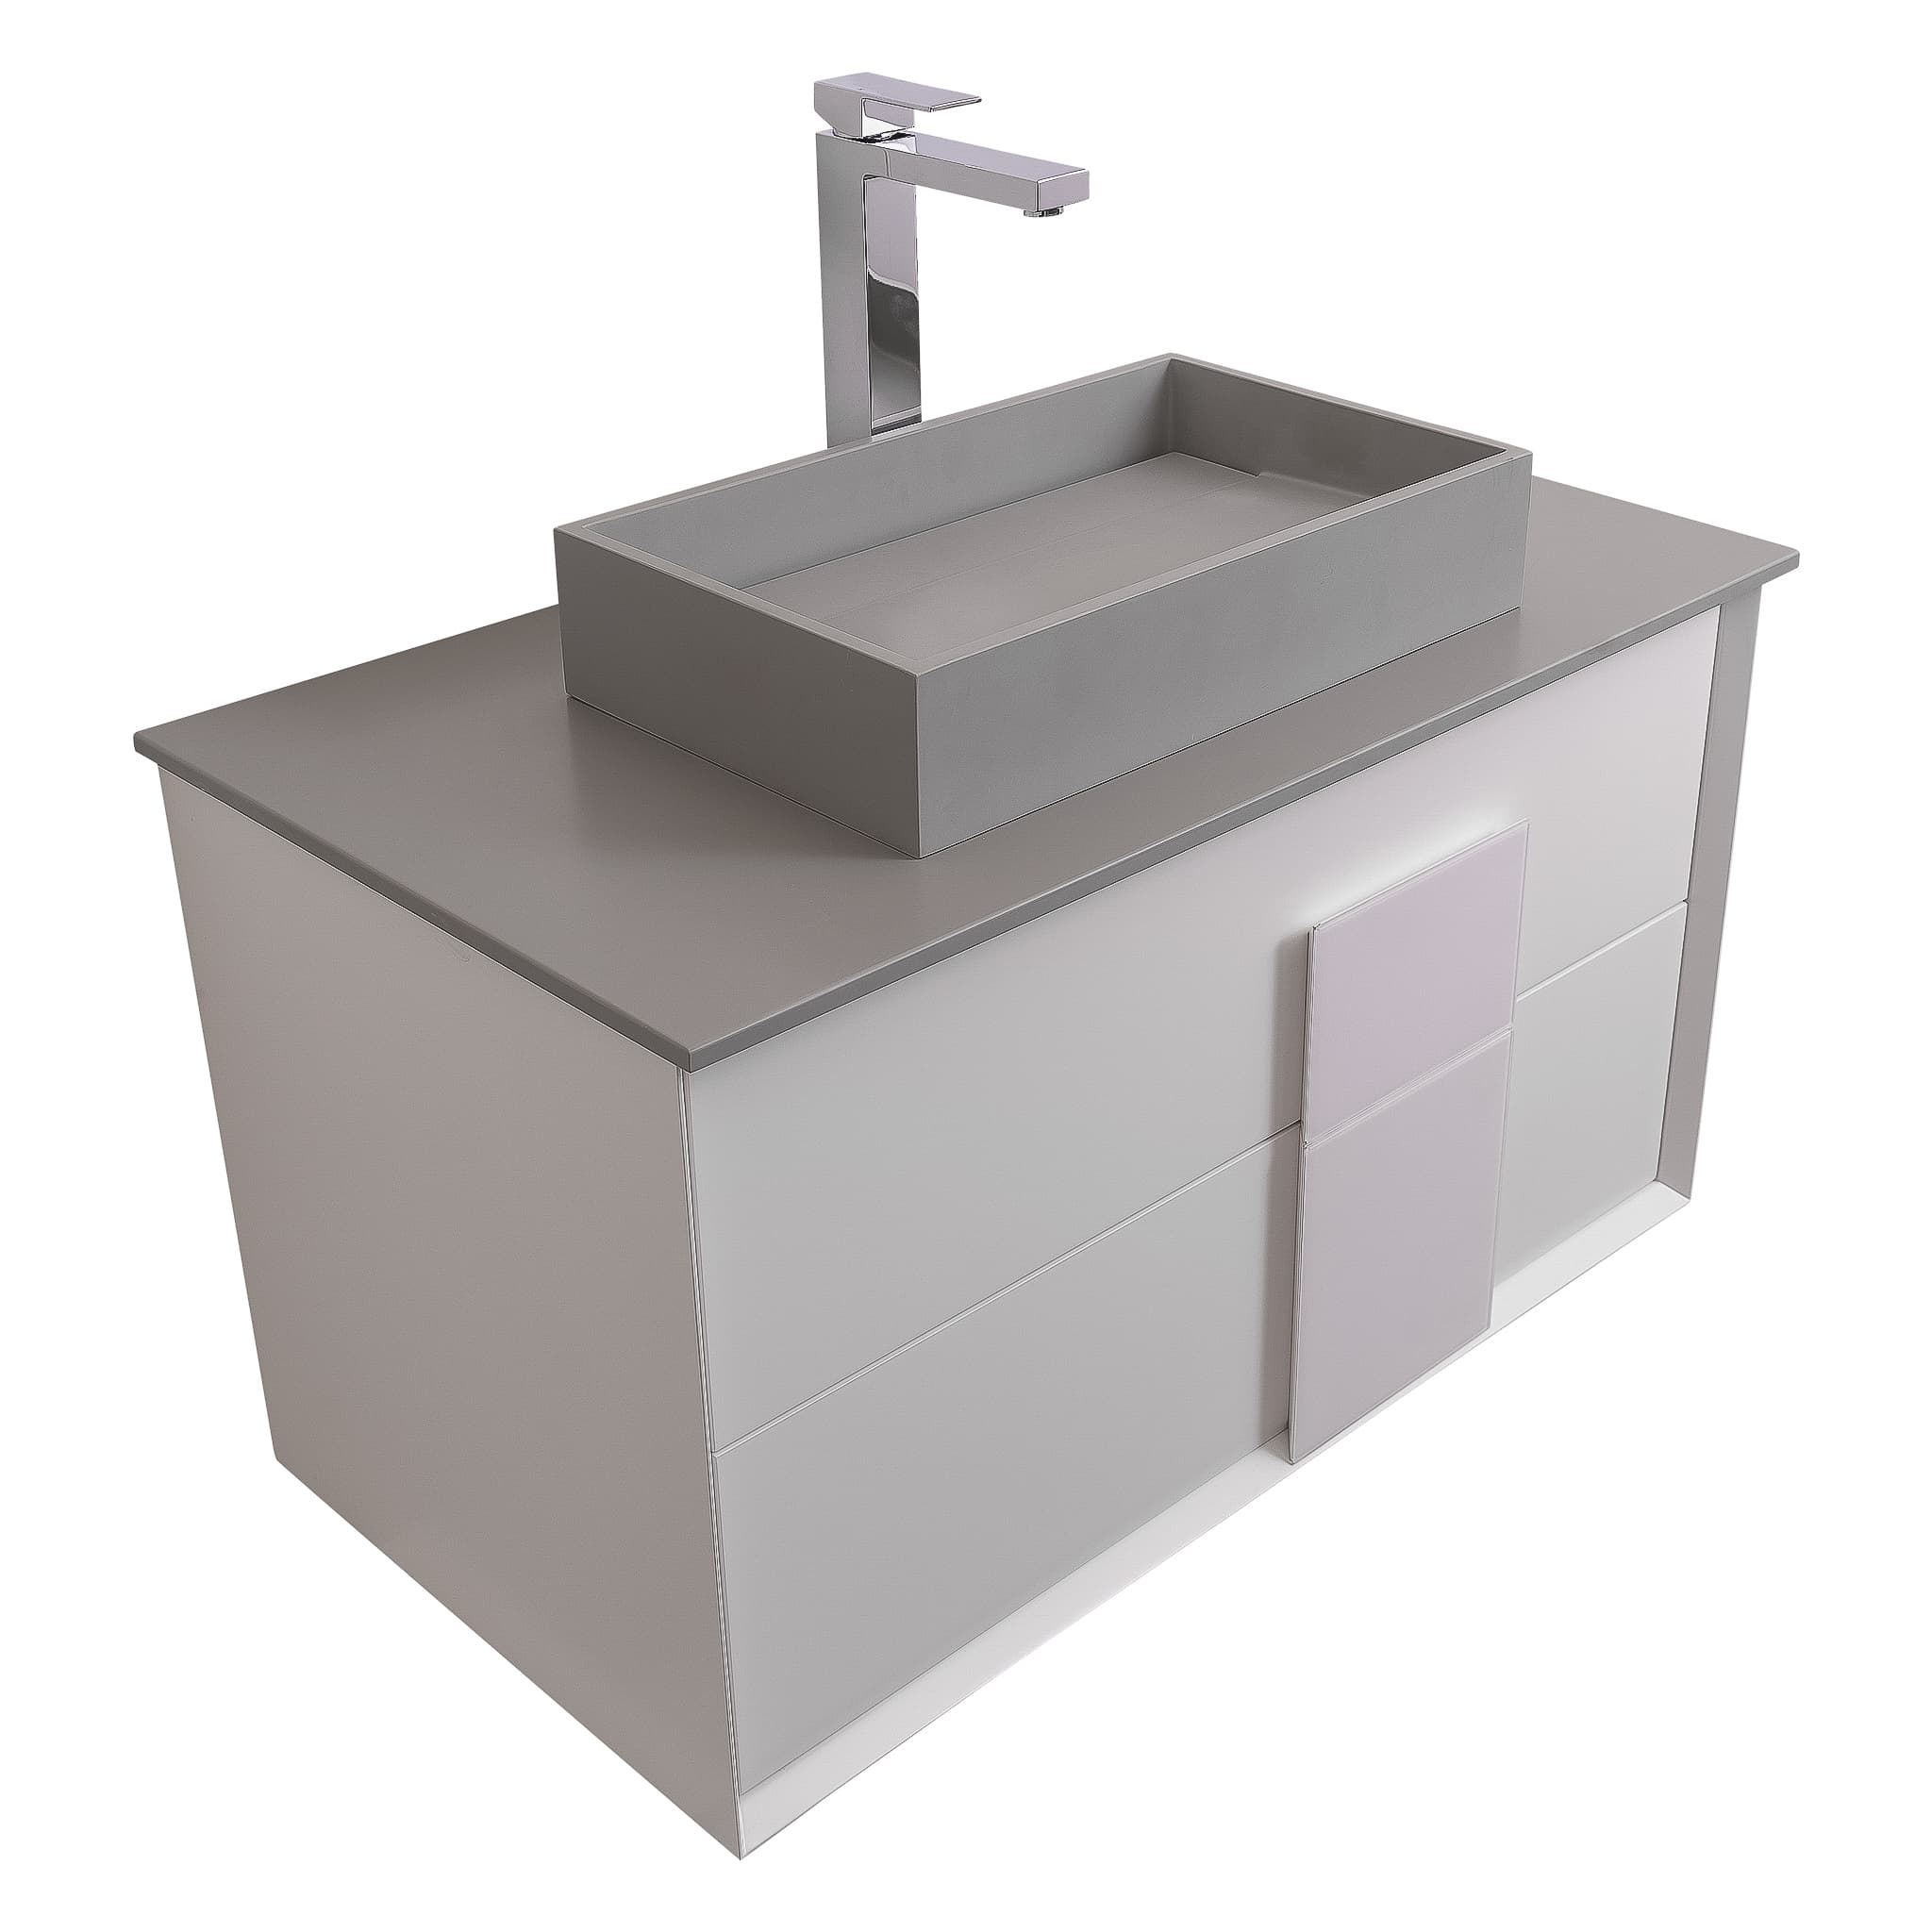 Piazza 31.5 Matte White With White Handle Cabinet, Solid Surface Flat Grey Counter and Infinity Square Solid Surface Grey Basin 1329, Wall Mounted Modern Vanity Set